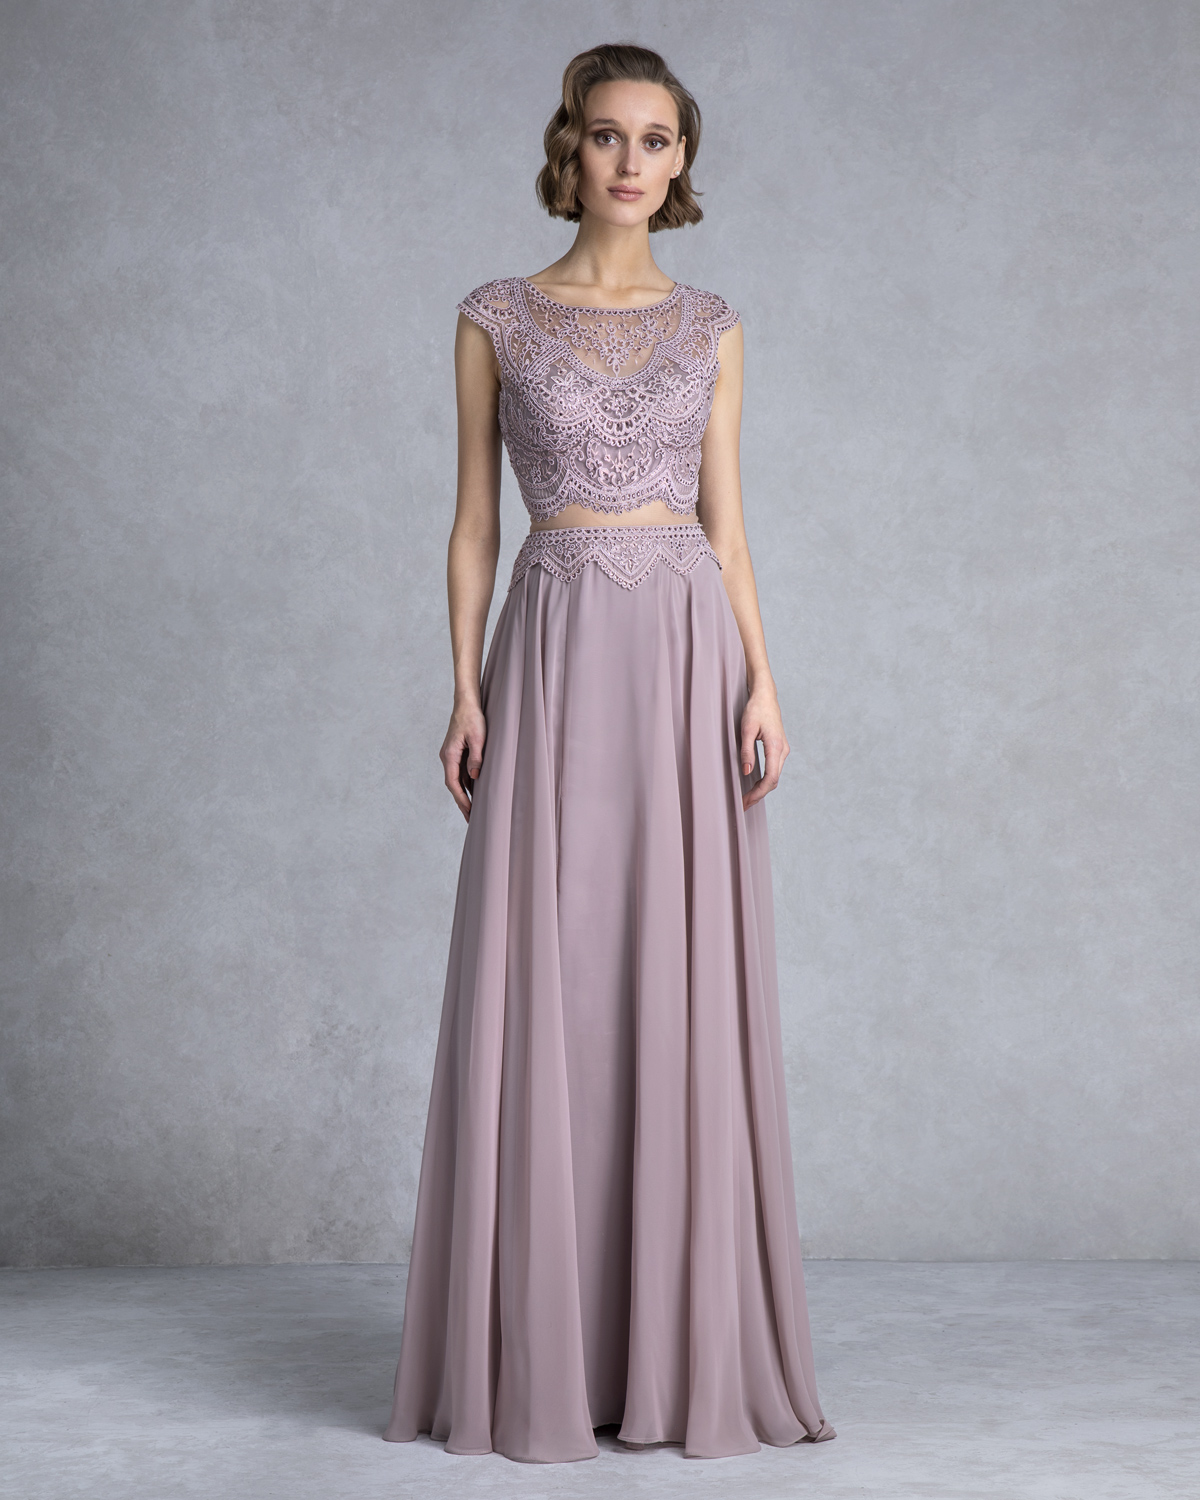 Evening Dresses / Long evening dress with lace and beading on the top